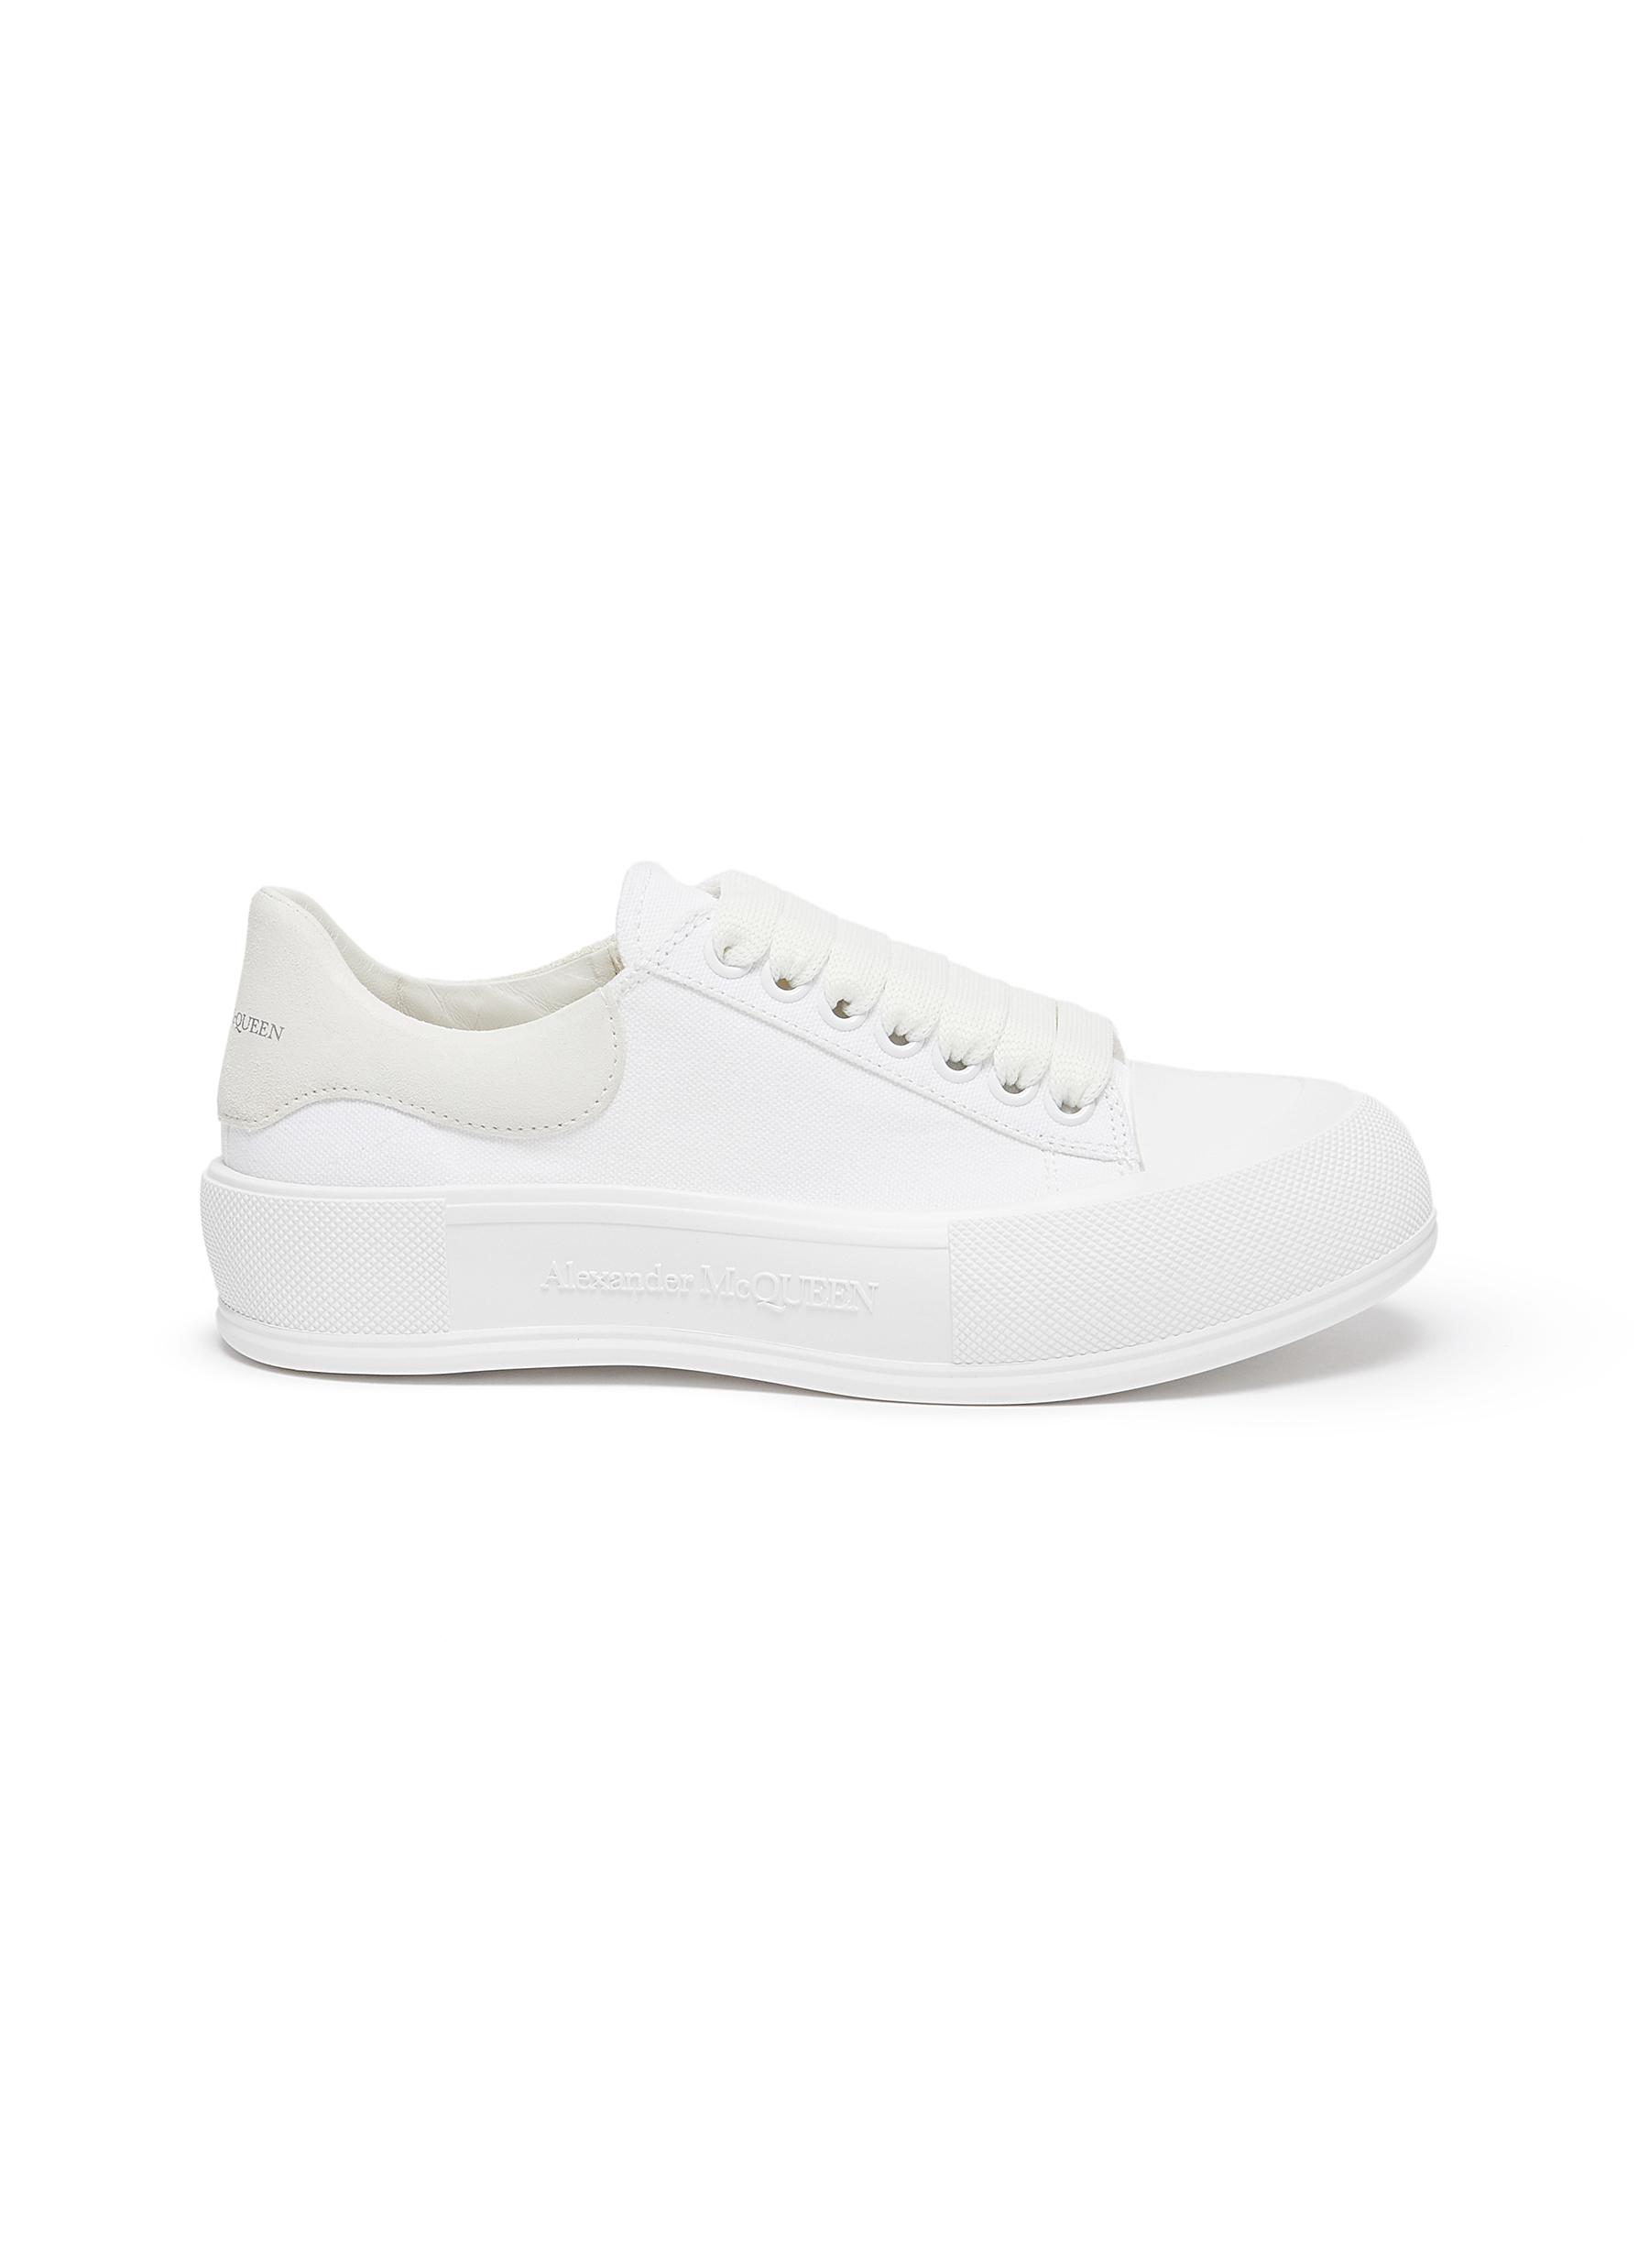 'Deck Plimsoll' lace-up sneakers